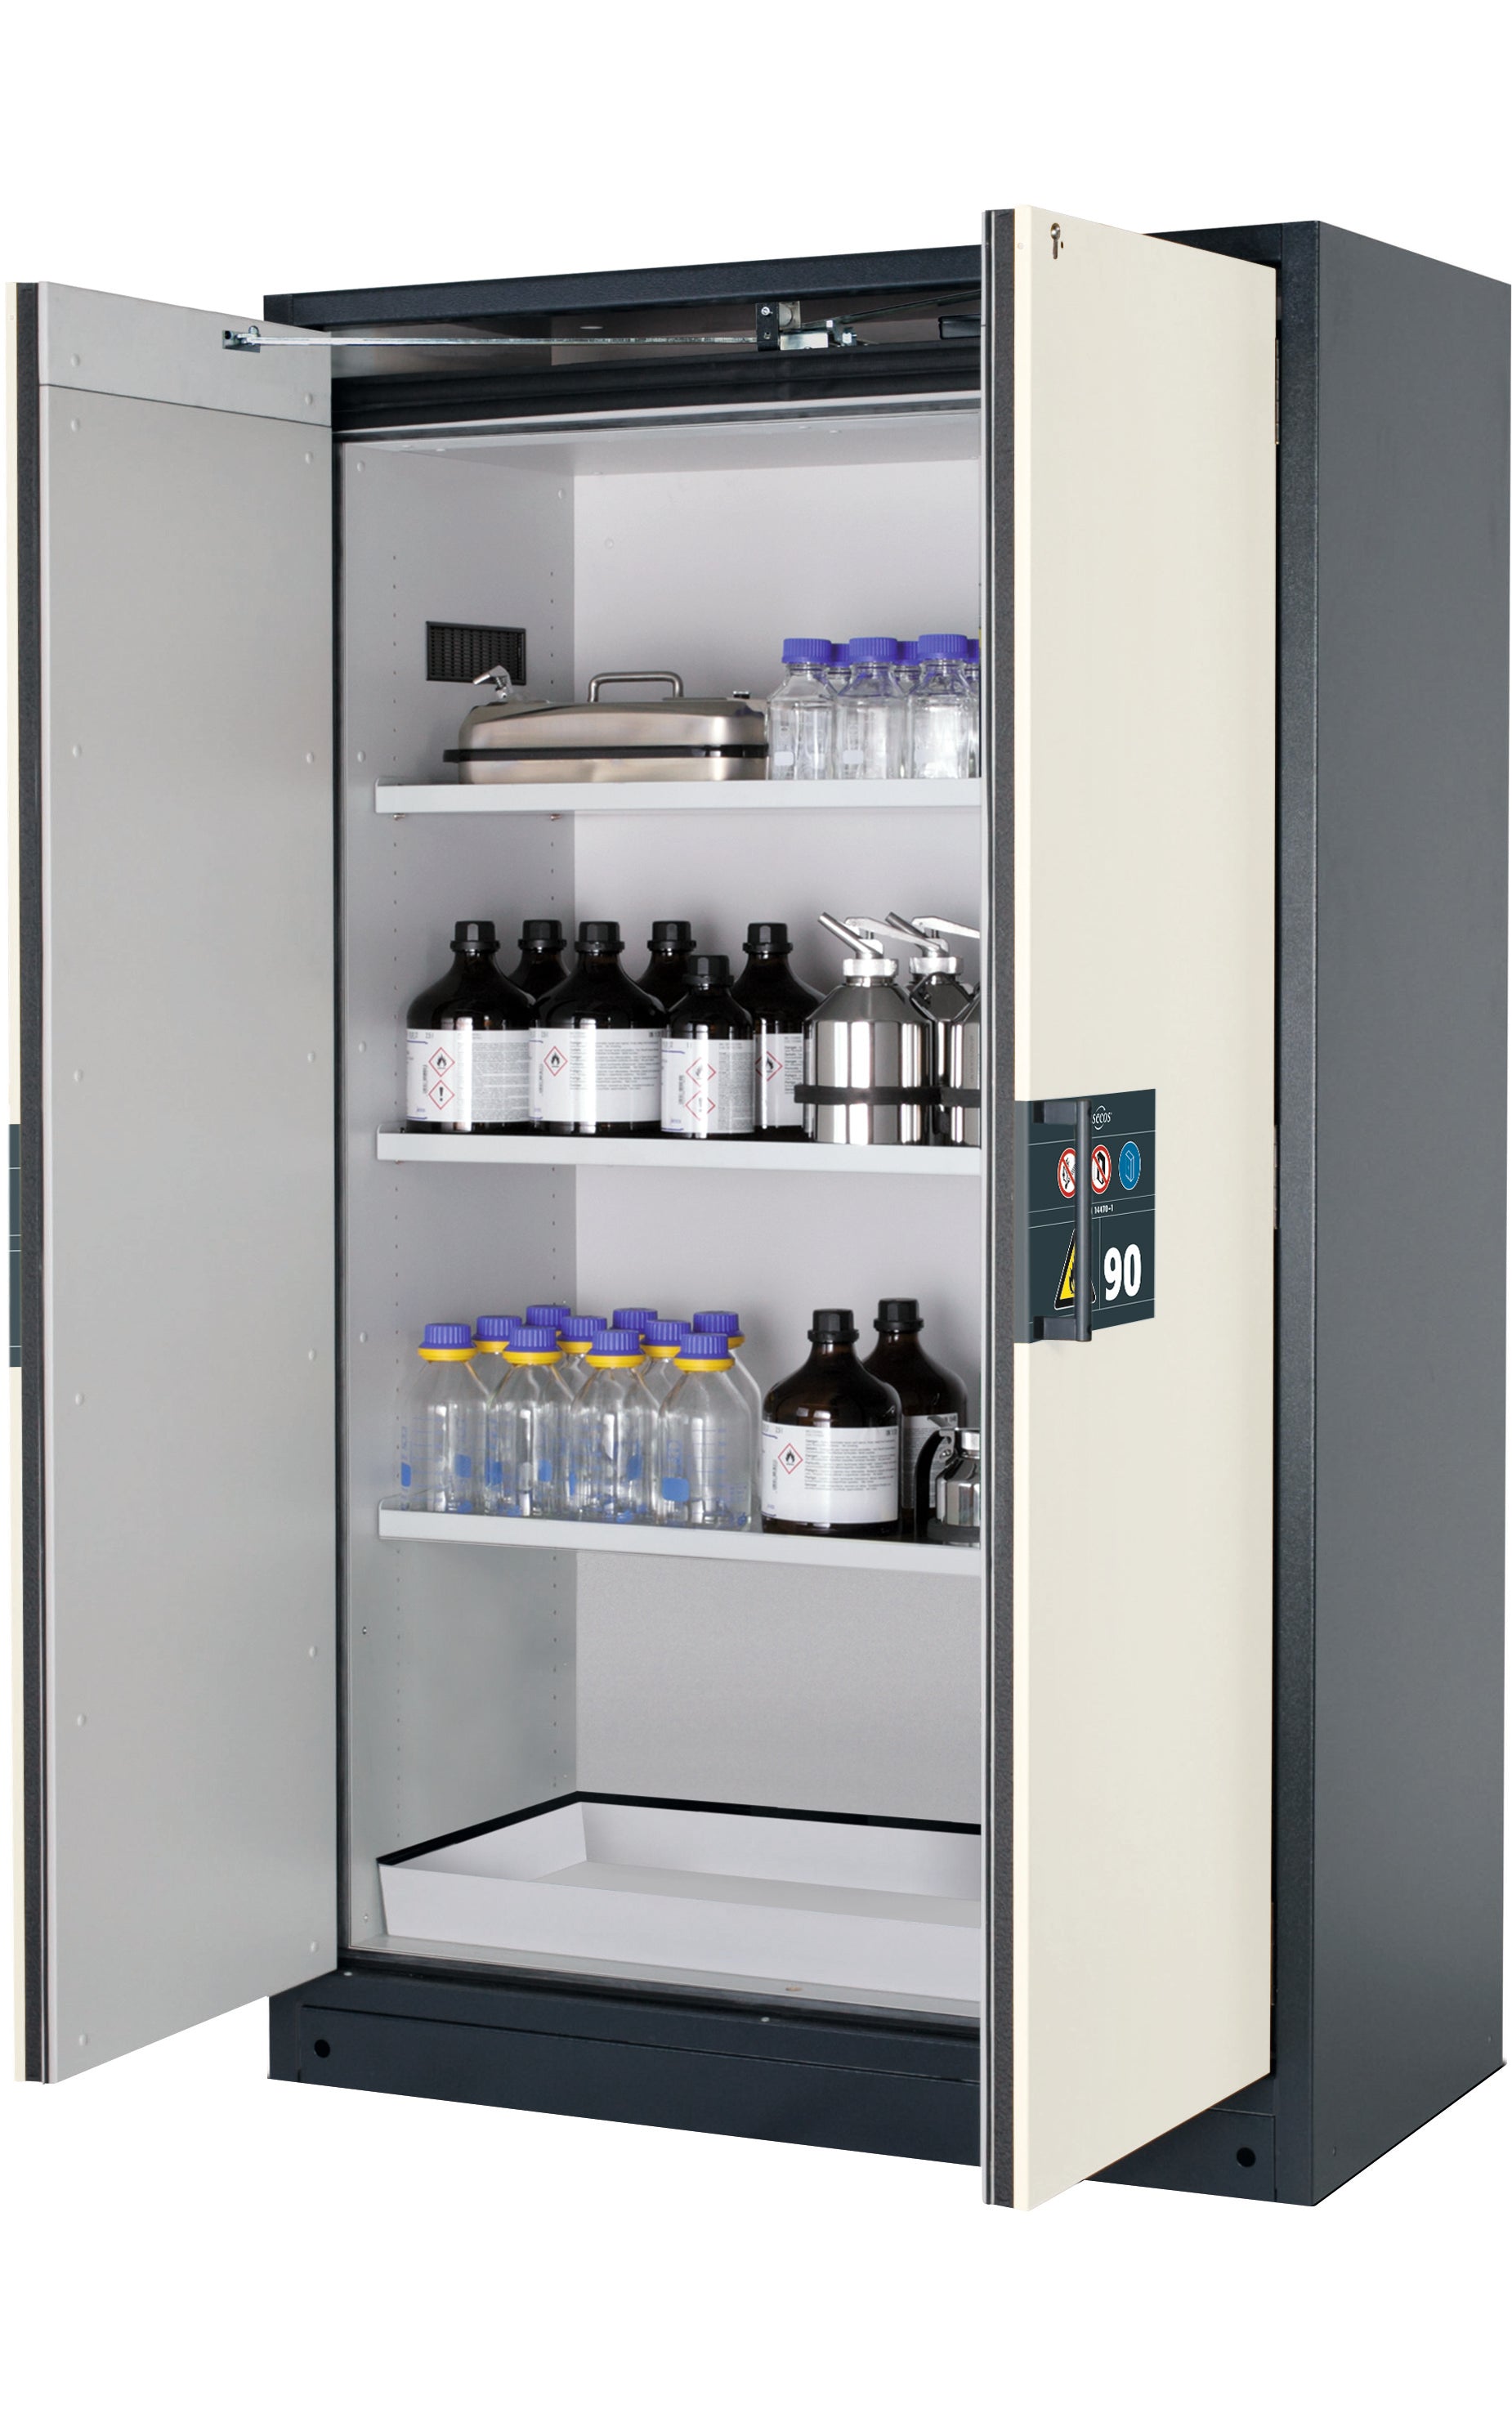 Type 90 safety storage cabinet Q-PEGASUS-90 model Q90.195.120.WDAC in pure white RAL 9010 with 3x shelf standard (sheet steel),